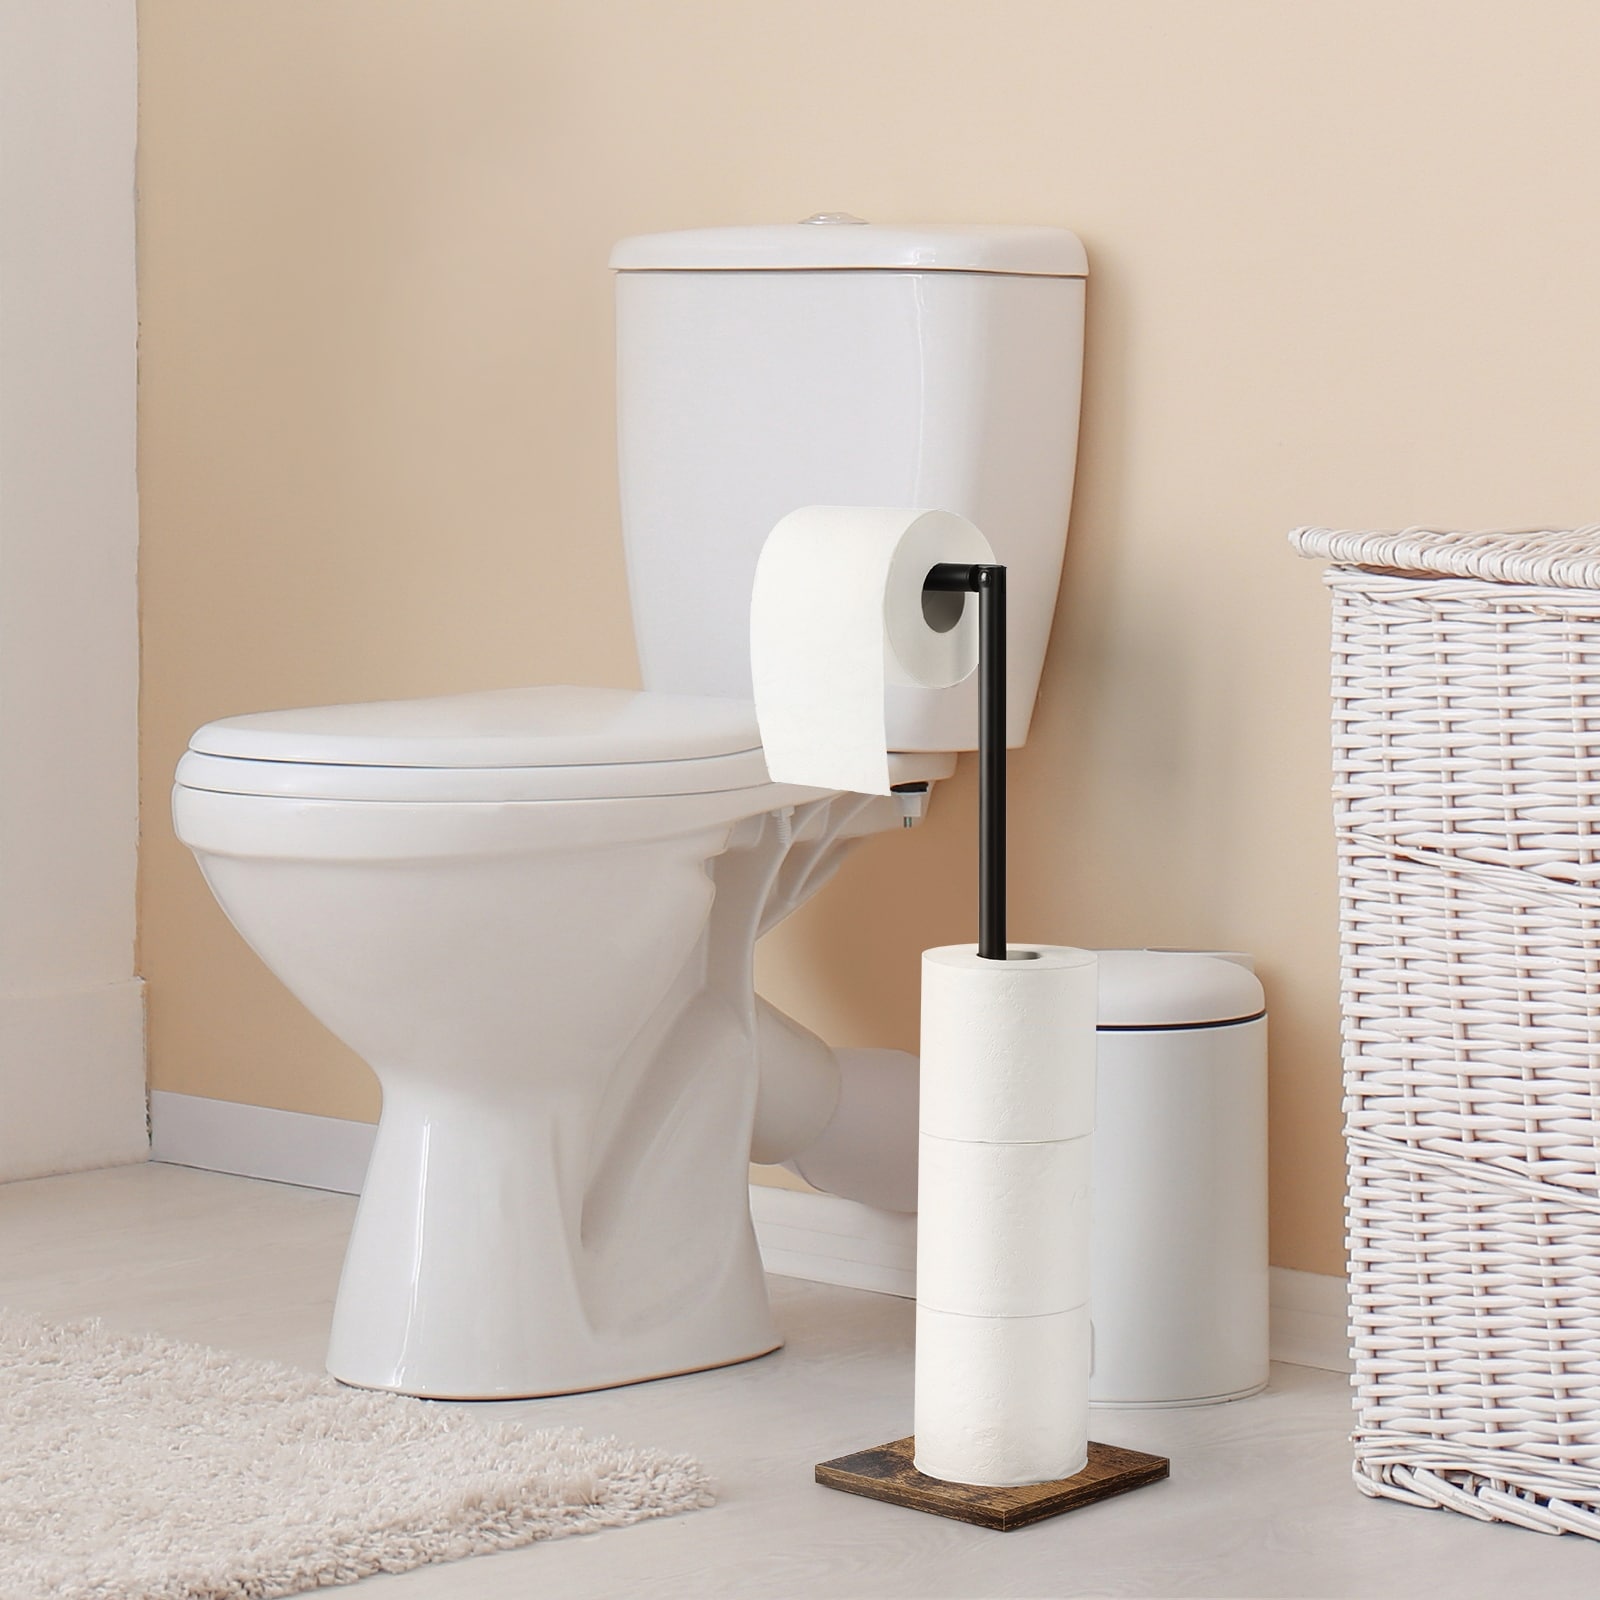 https://ak1.ostkcdn.com/images/products/is/images/direct/1905aa162b297ce1c413a038365fcc4182da44c6/Free-Standing-Toilet-Paper-Holder-for-Bathroom.jpg